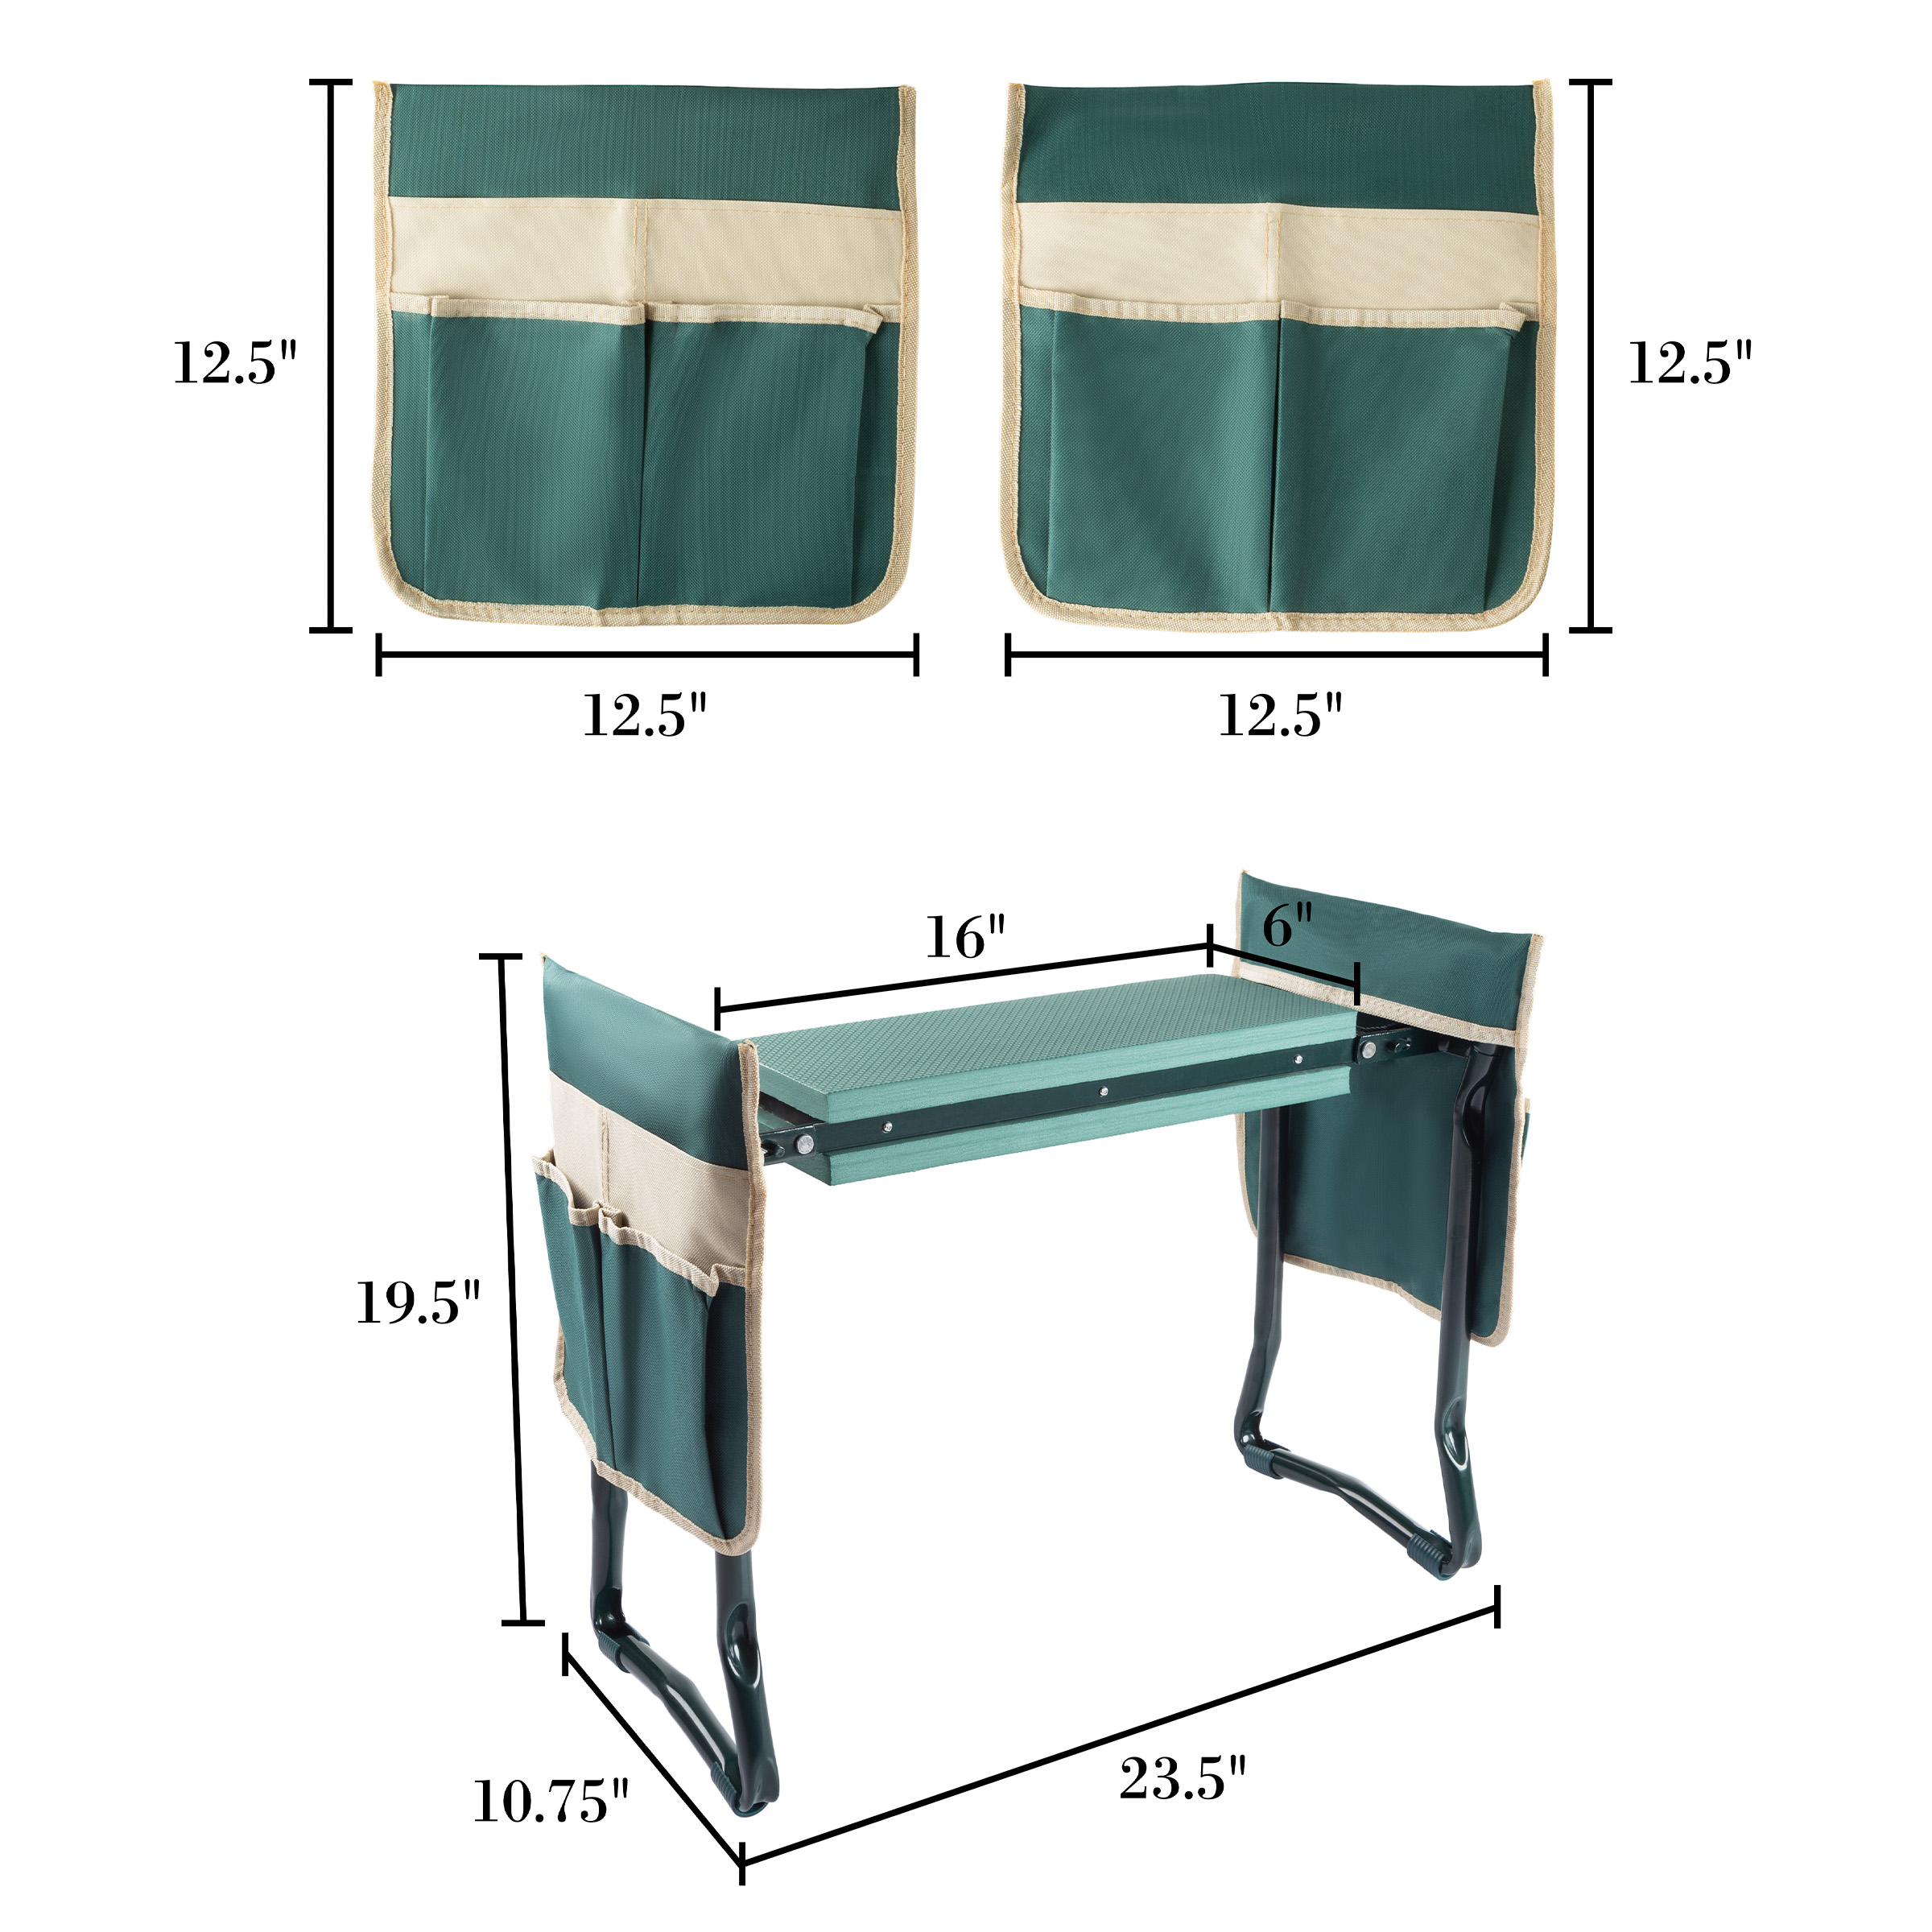 Pure Garden Kneeler Bench - Foldable Stool with 2 Tool Pouches (Green) - image 2 of 7